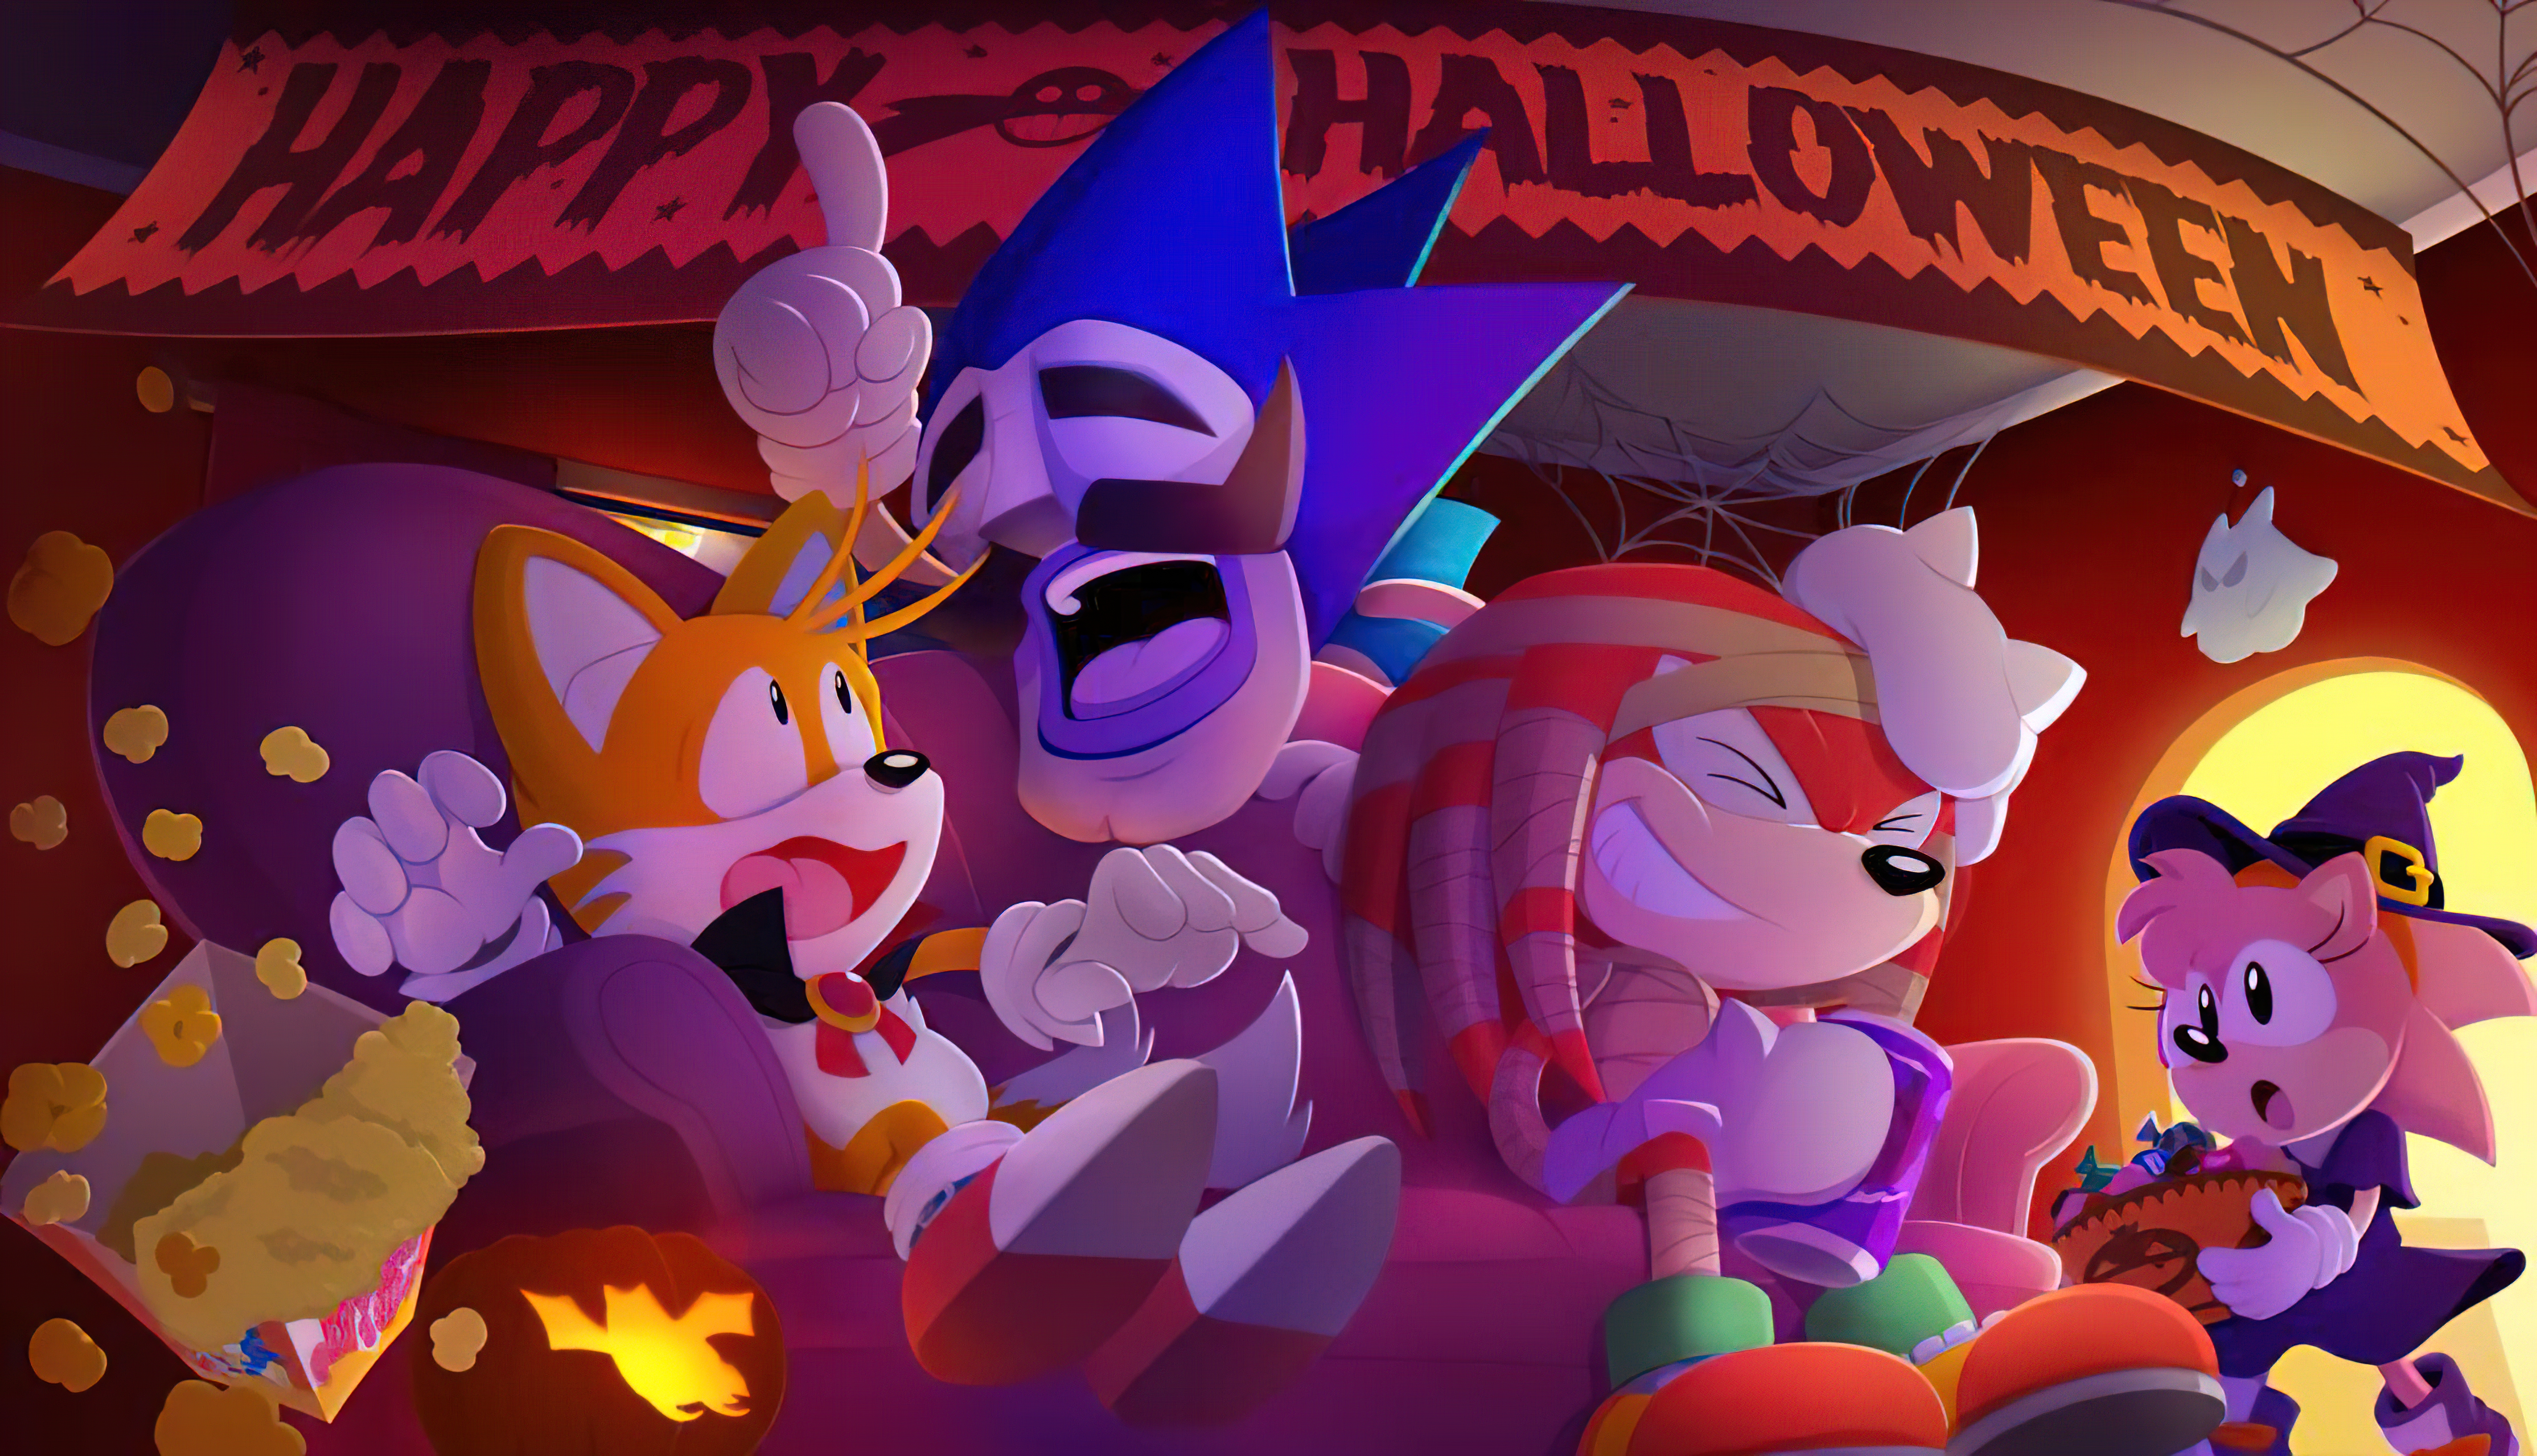 Sonic Sonic The Hedgehog Tails Character Sega Video Game Art Knuckles PC Gaming Halloween Halloween  5760x3306